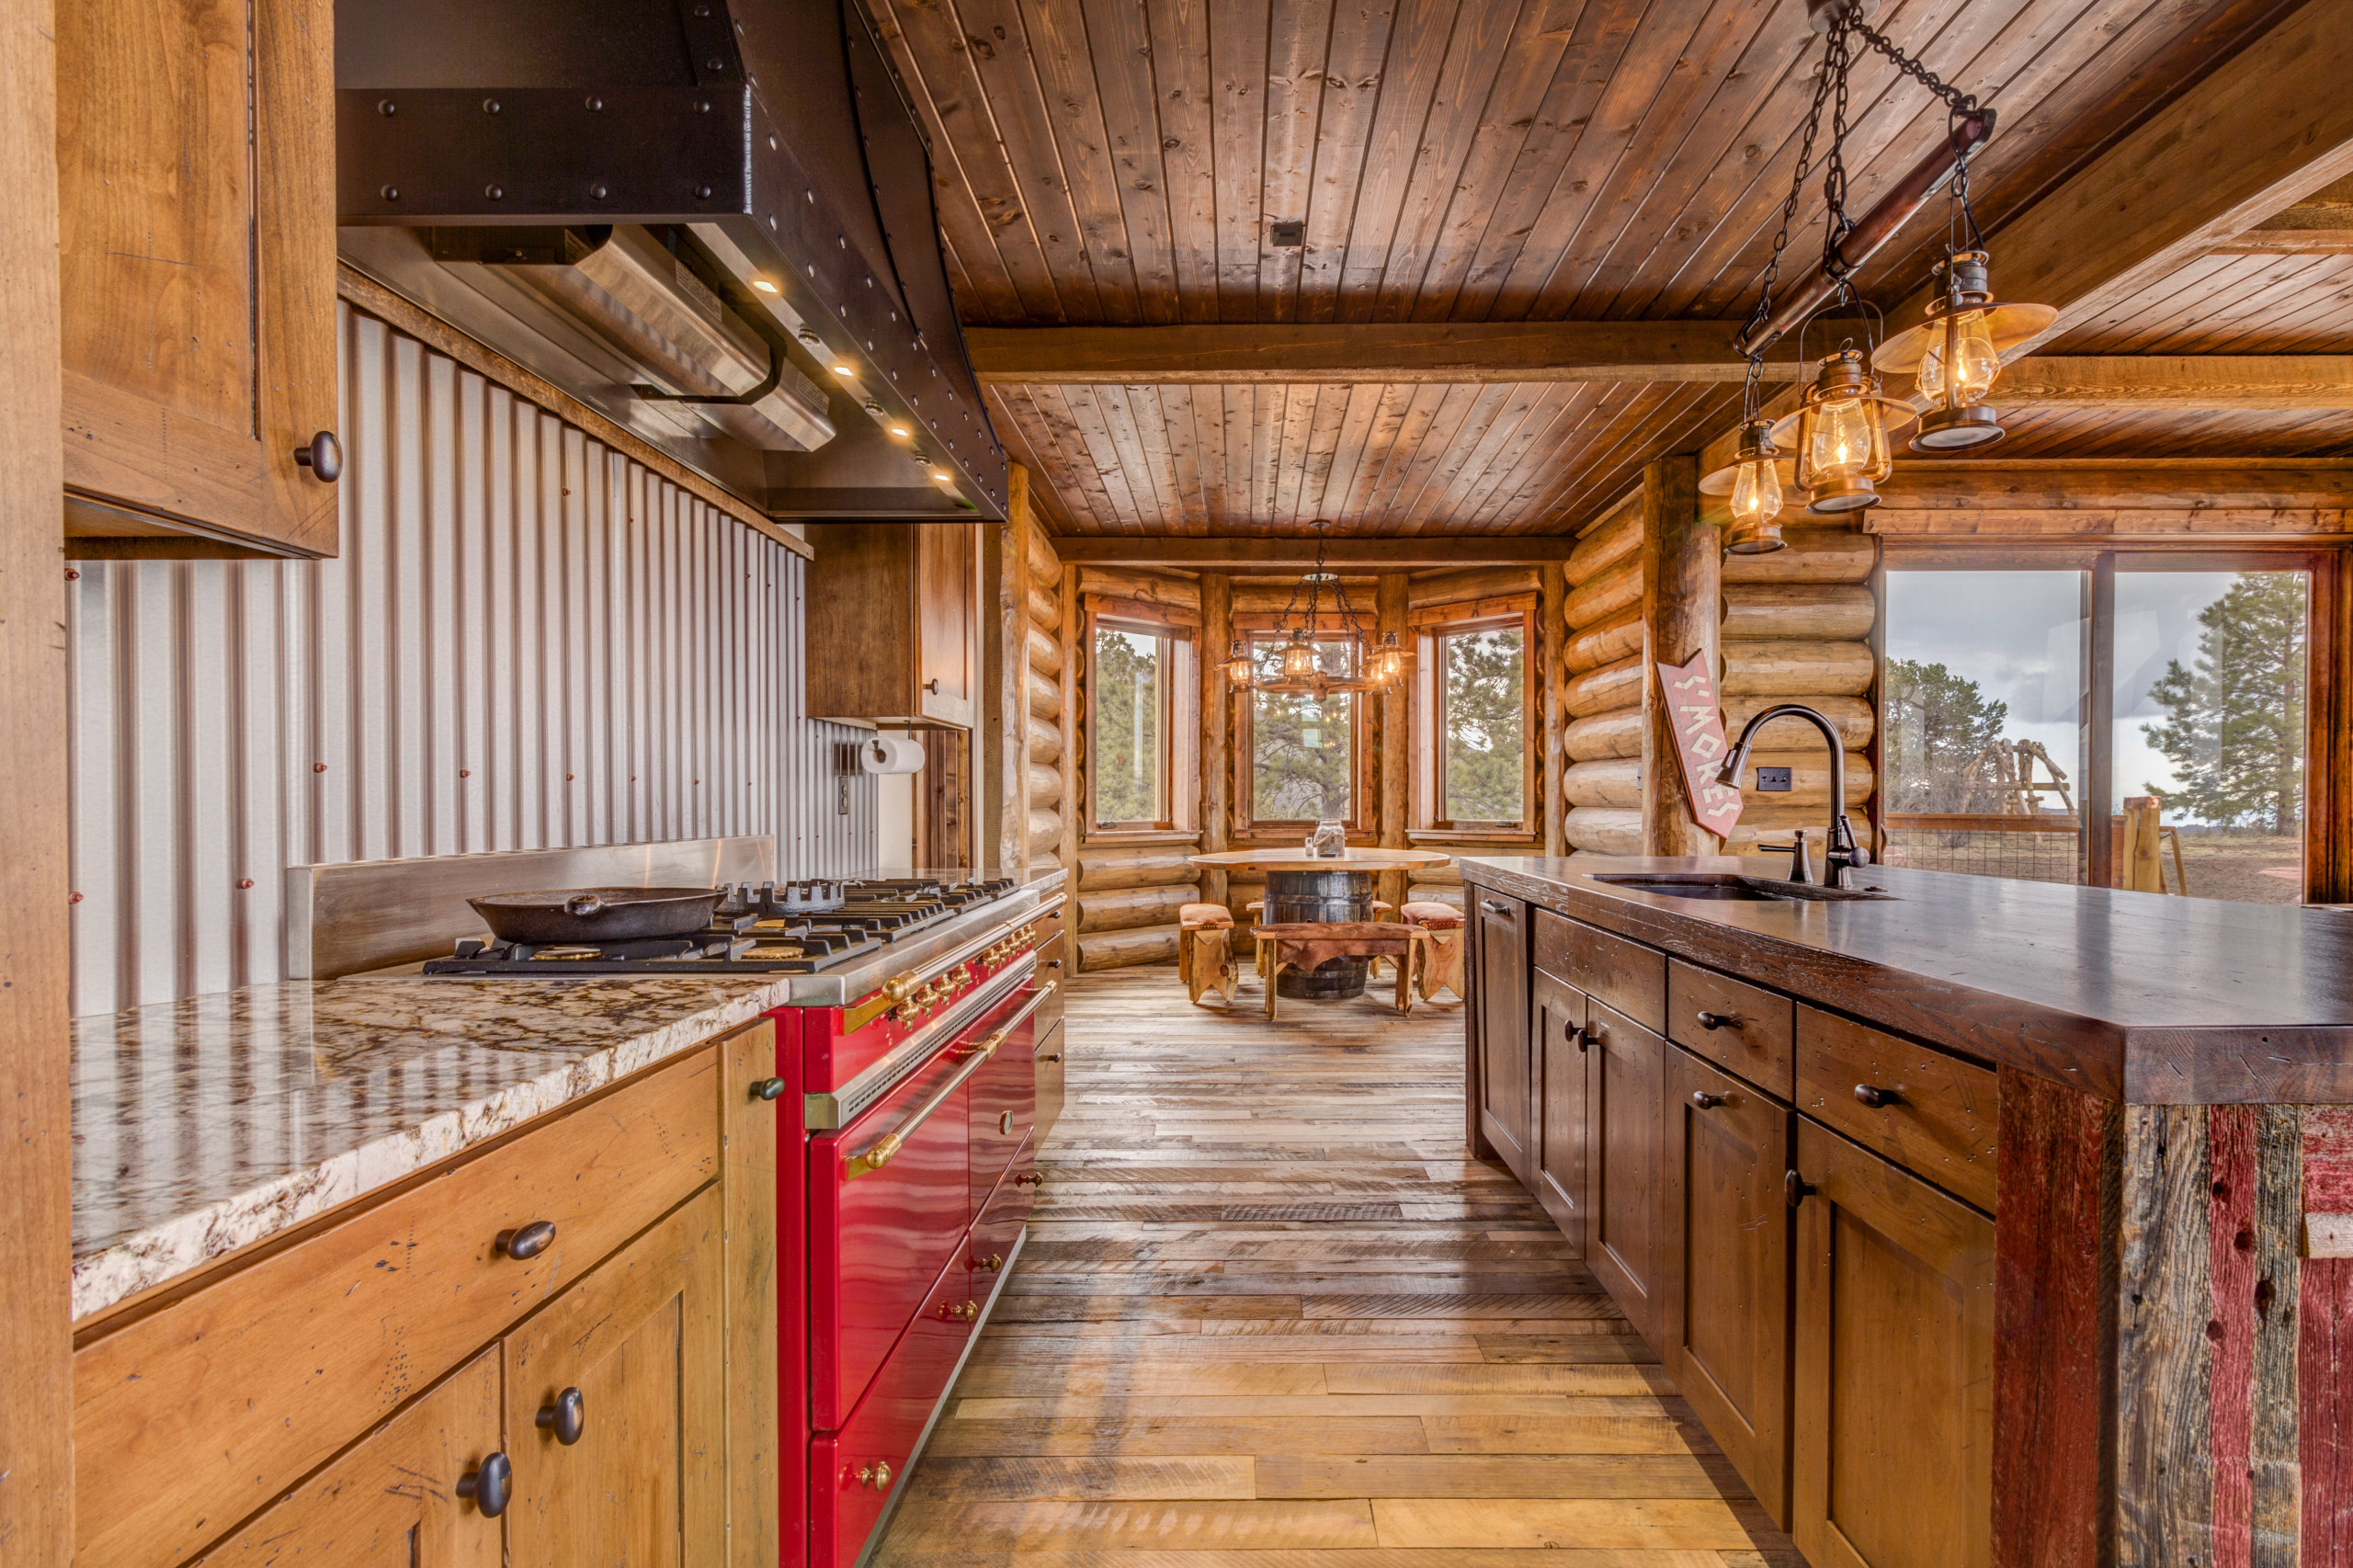 18 Wood Ceiling Kitchen Ideas You'll Love   August, 18   Houzz